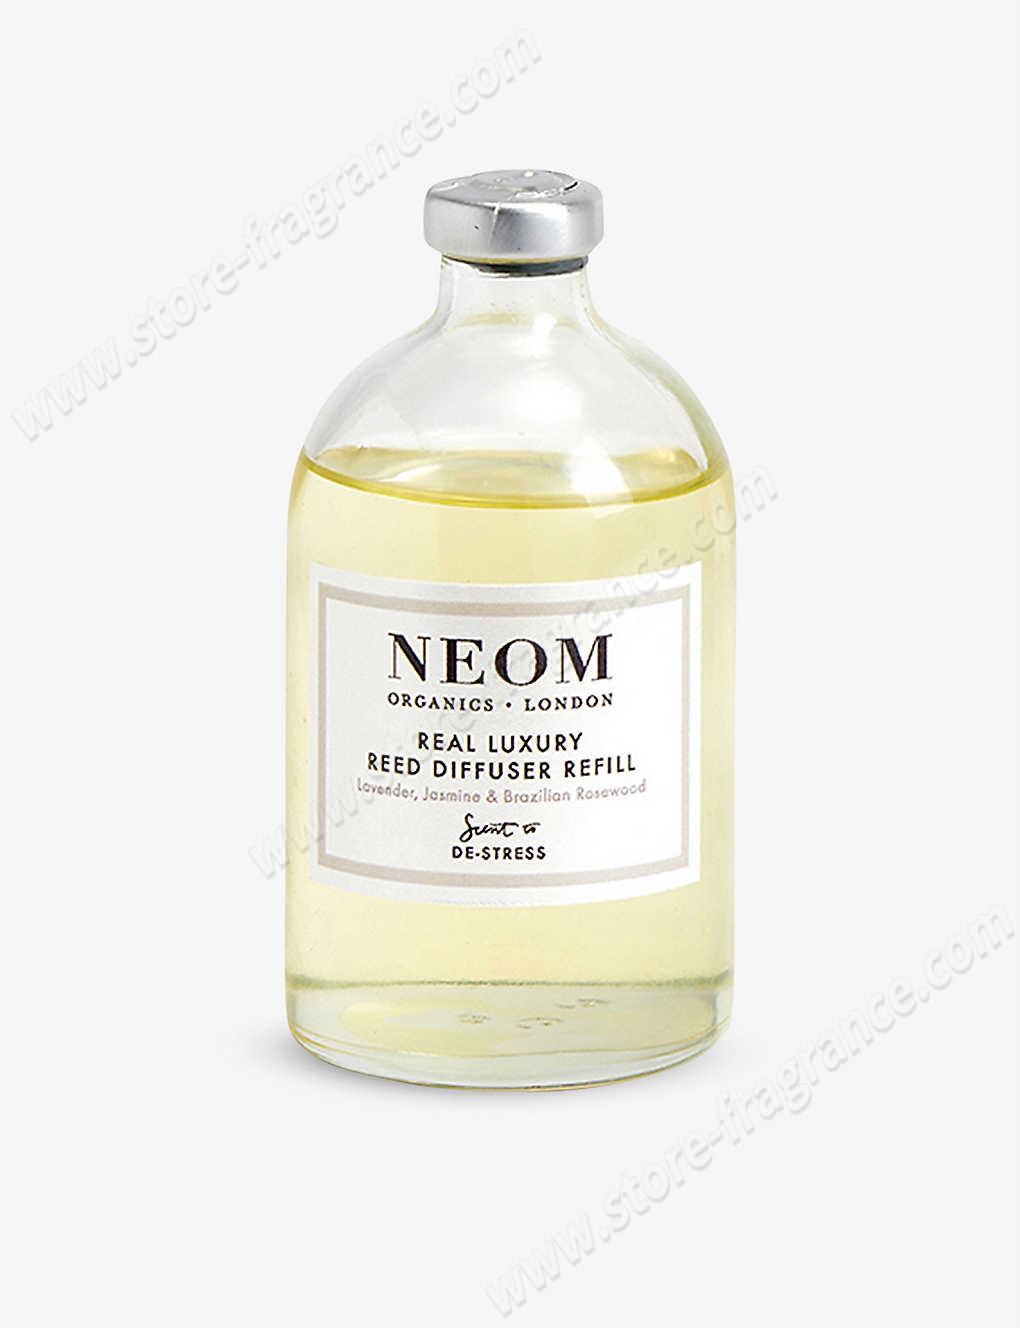 NEOM/Real luxury reed diffuser refill 100ml ✿ Discount Store - NEOM/Real luxury reed diffuser refill 100ml ✿ Discount Store